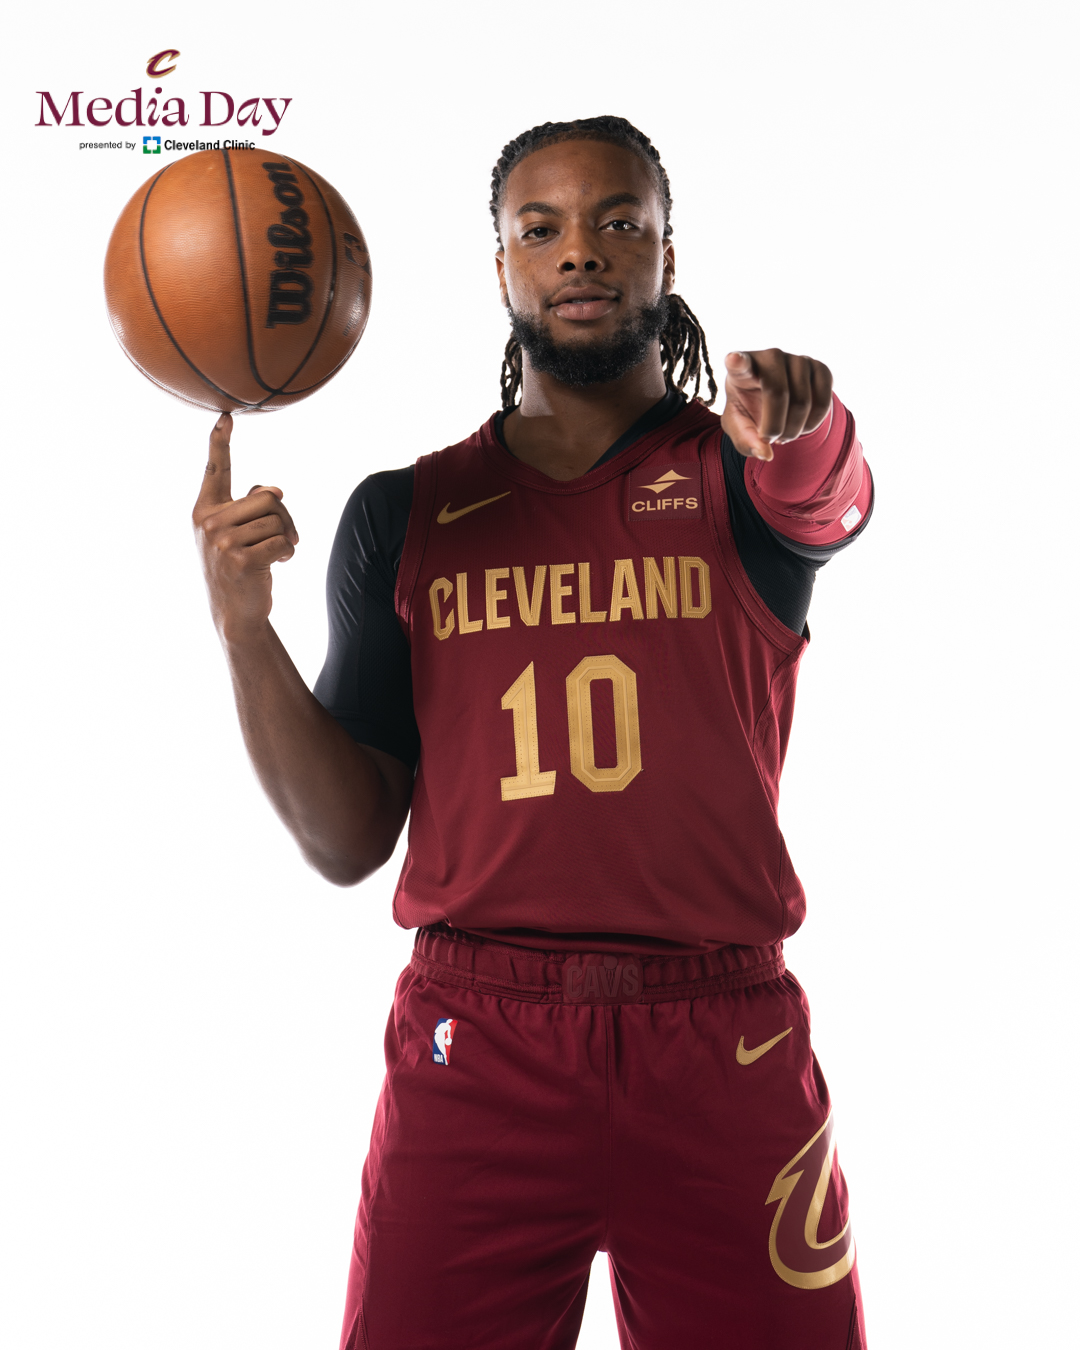 Cleveland Cavaliers Team Shop - Tonight's Cleveland Cavaliers  #TeamShopHighlight is 20% off Classic Jerseys & Collection! Get your 90s  Retro Gear tonight at Rocket Mortgage FieldHouse & Cavs.com/shop!  #CavsStyle, #Cavs50